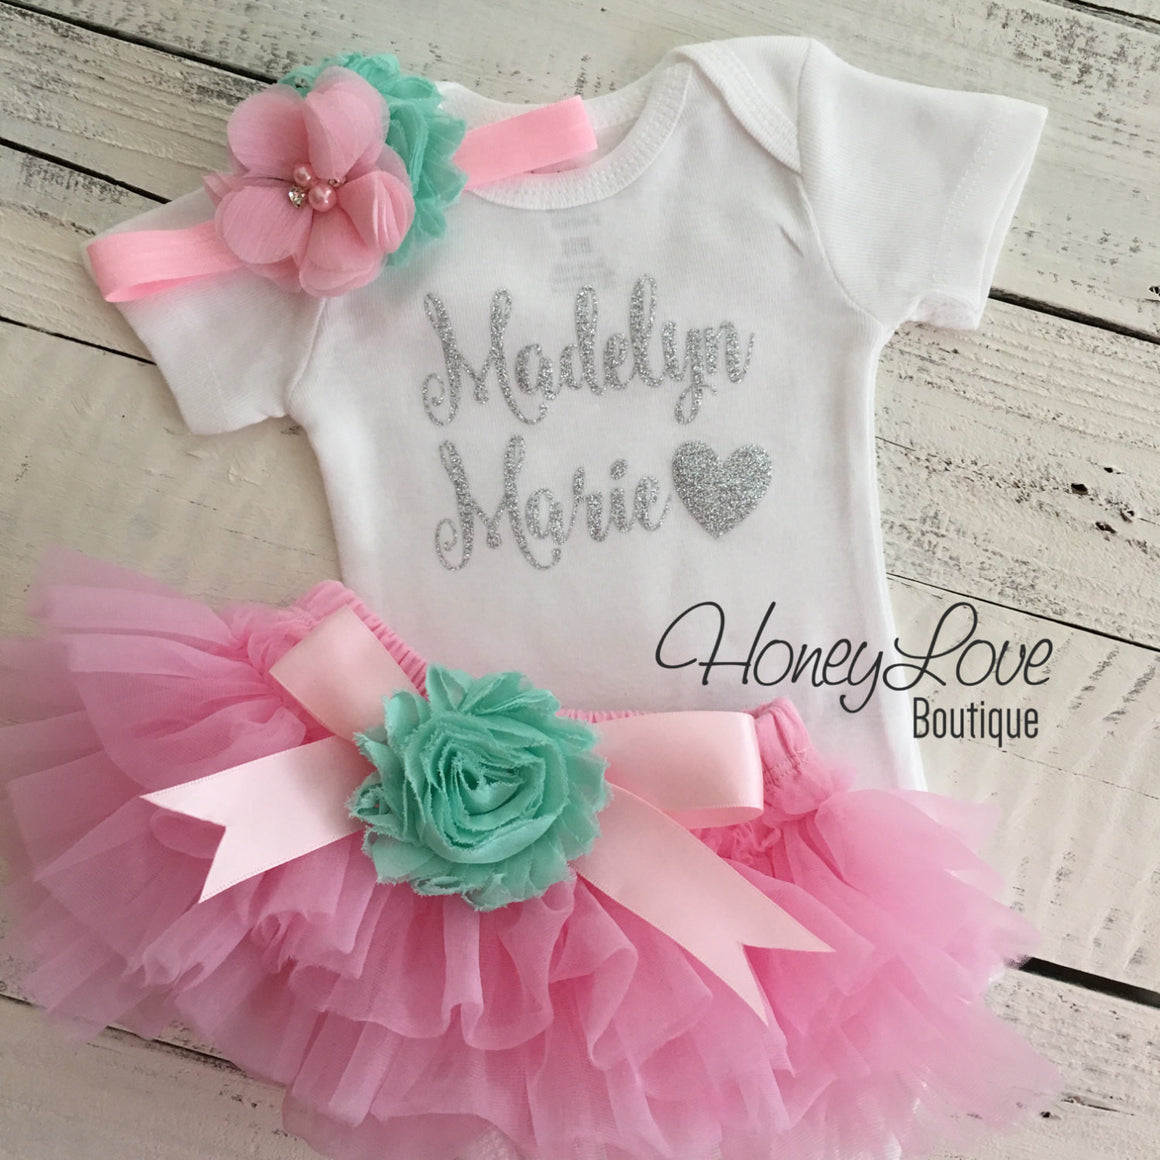 PERSONALIZED Name Outfit - Light Pink and Silver Glitter - Mint/Aqua flower embellished tutu skirt bloomers - HoneyLoveBoutique